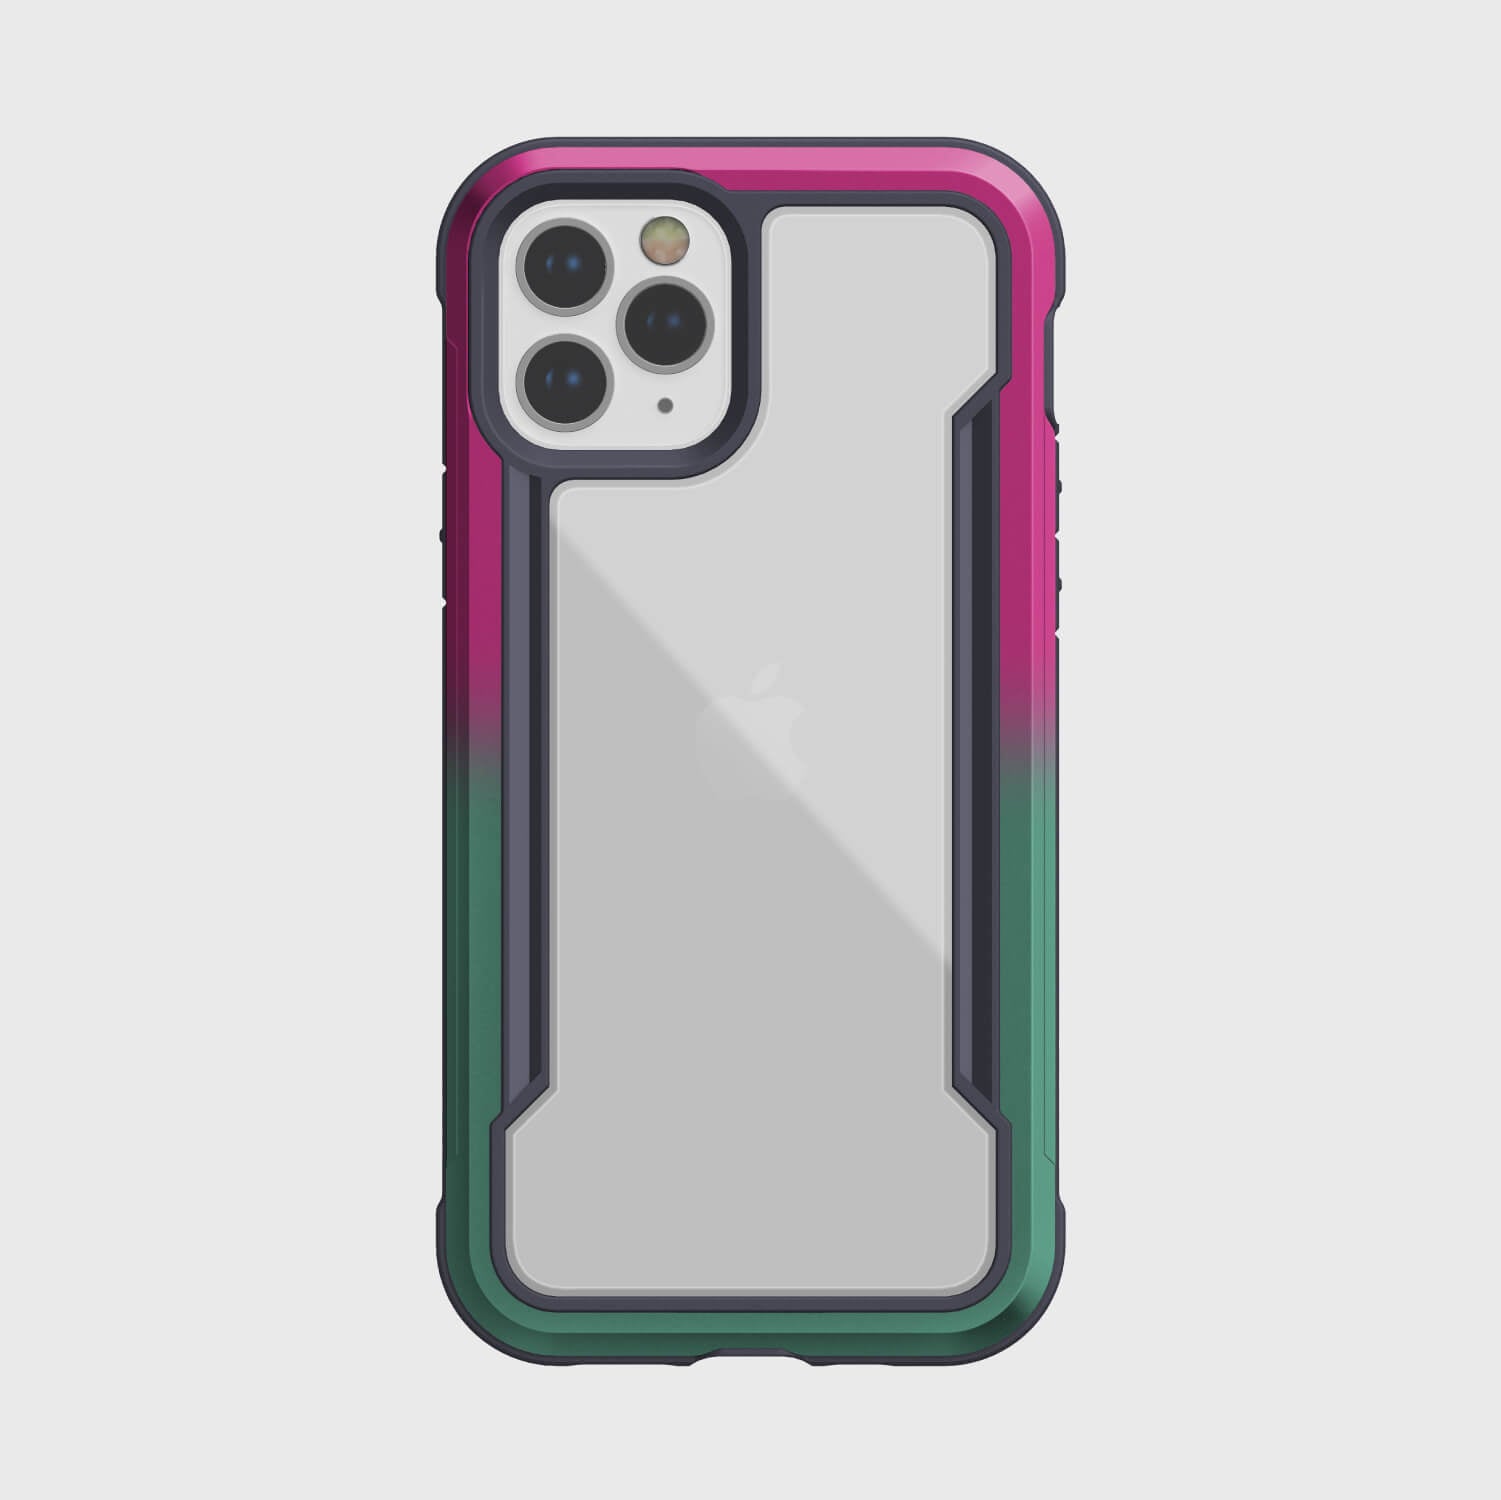 A pink and green Raptic SHIELD case for the iPhone 12 Pro, providing protection.